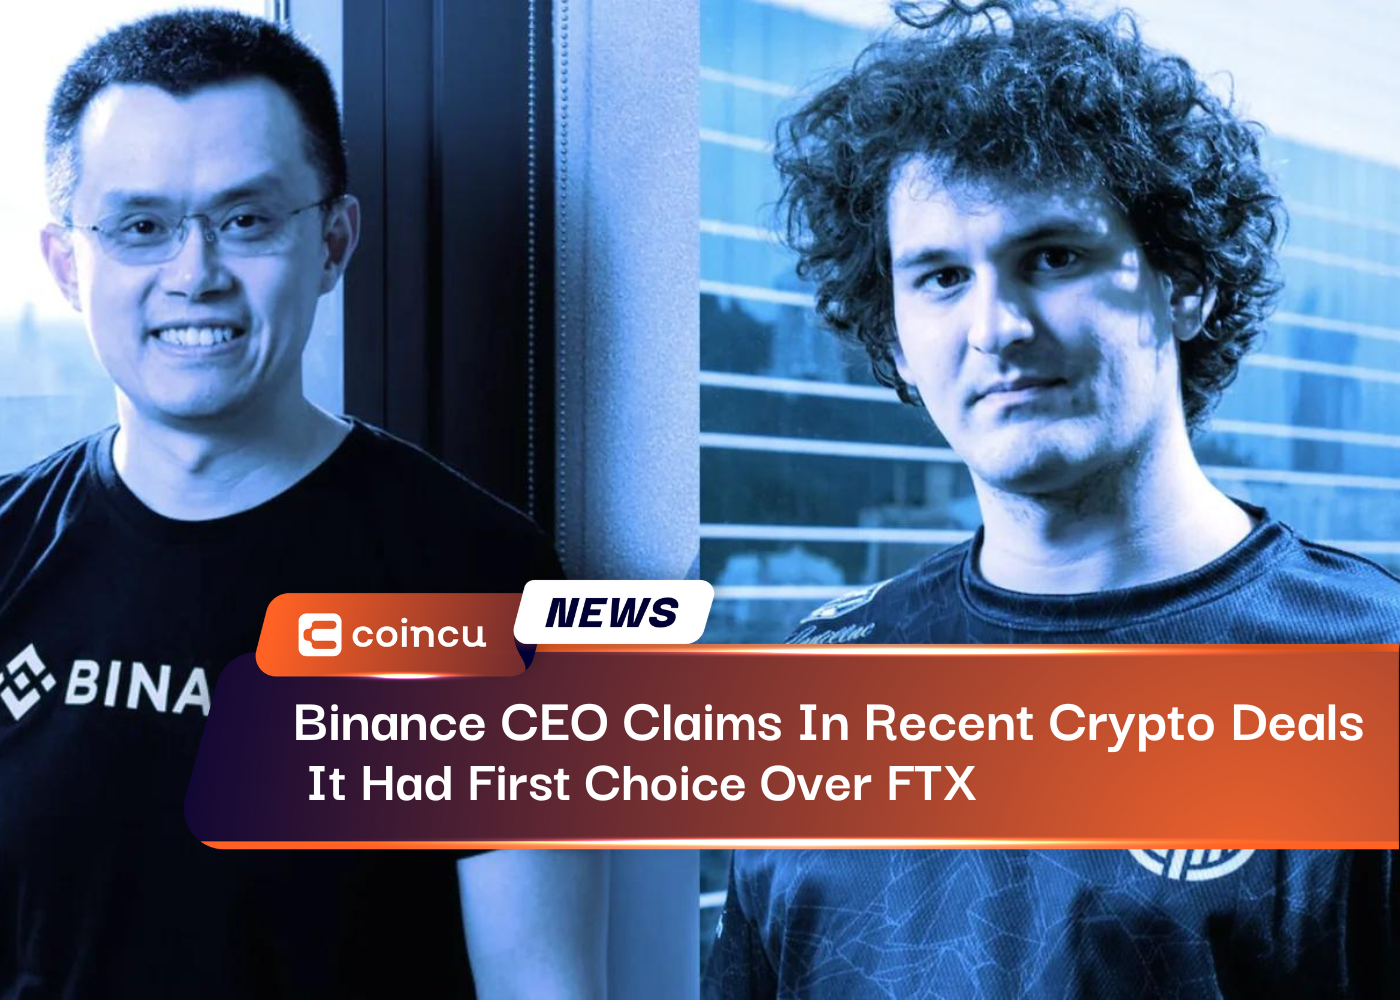 Binance CEO Claims In Recent Crypto Deals